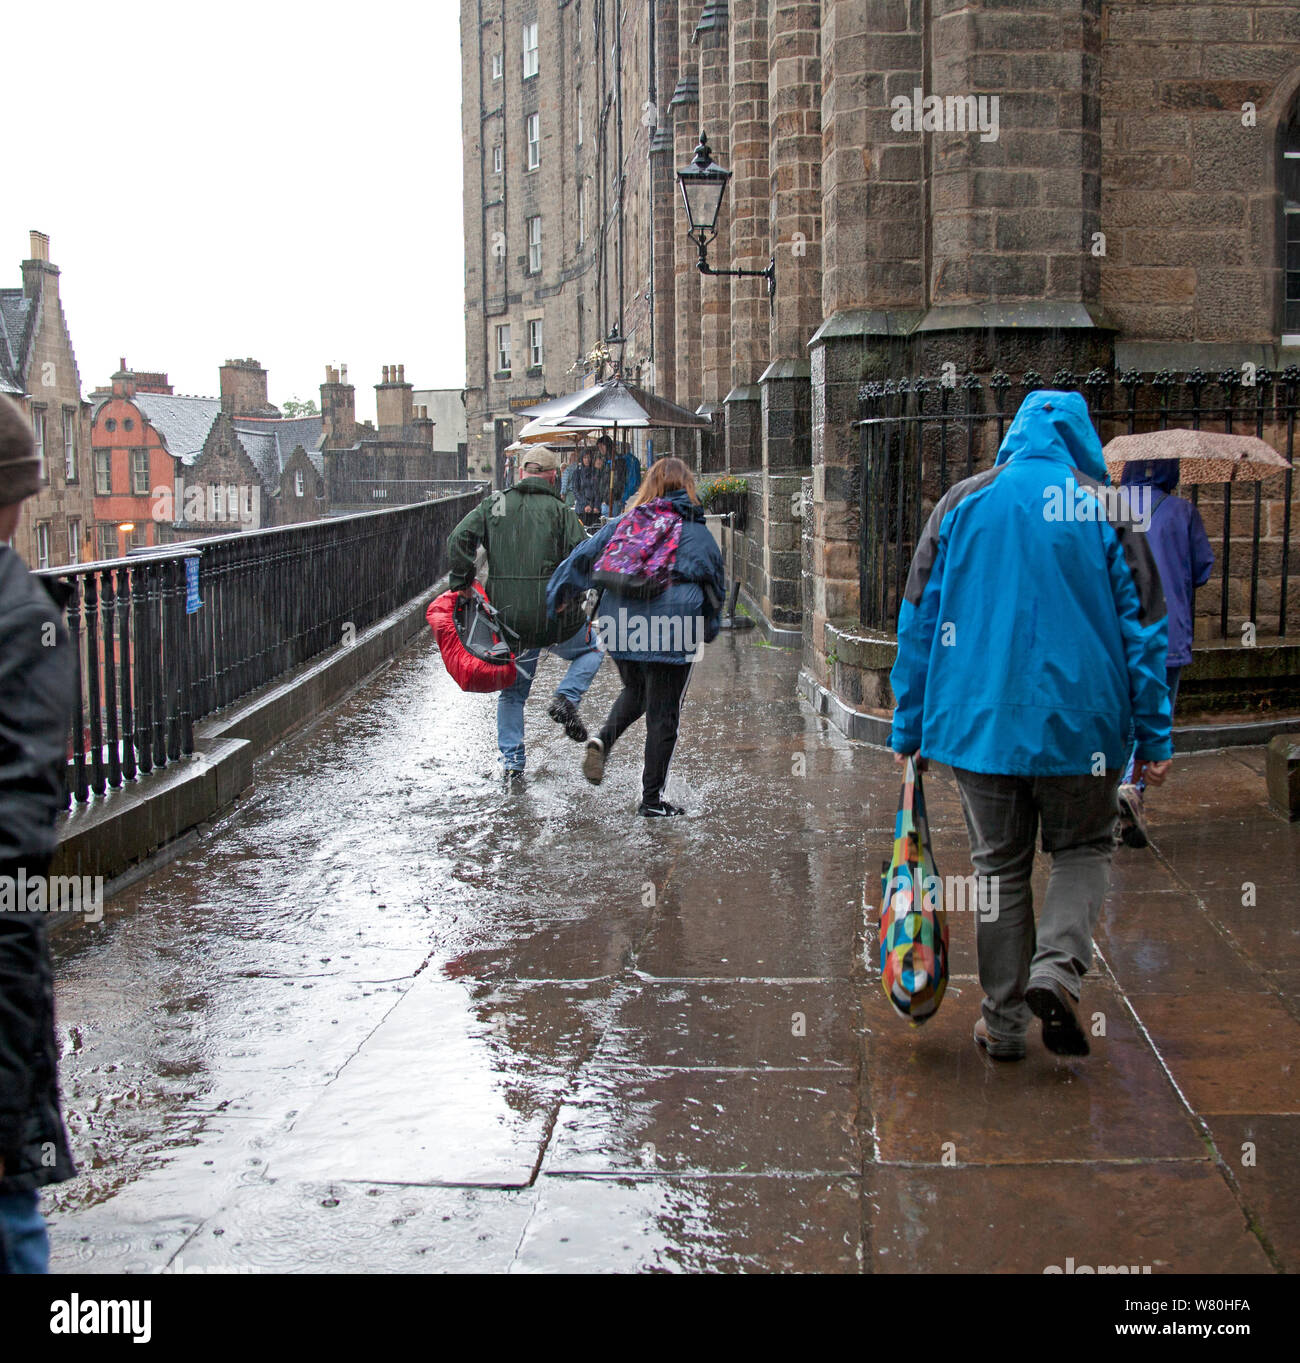 Edinburgh, Scotland, UK. 7th August 2019.Torrential downpours hit the city with thunder and lightning in late afternoon, causing most to run for cover under their umbrellas, slight flooding occurred in the city centre, above Victoria Street. Stock Photo